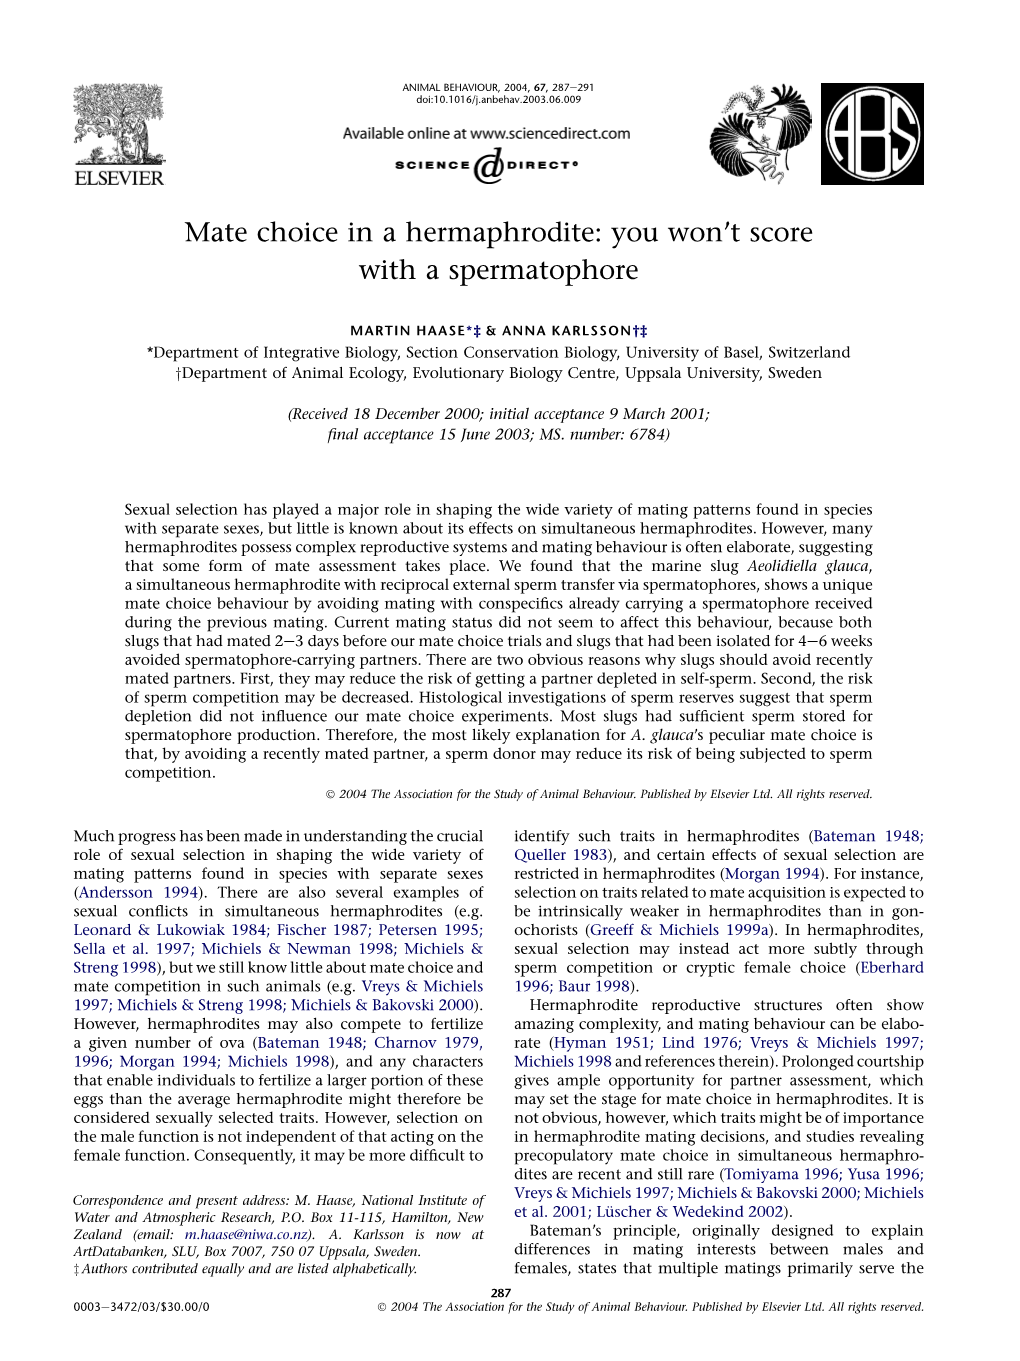 Mate Choice in a Hermaphrodite: You Won’T Score with a Spermatophore